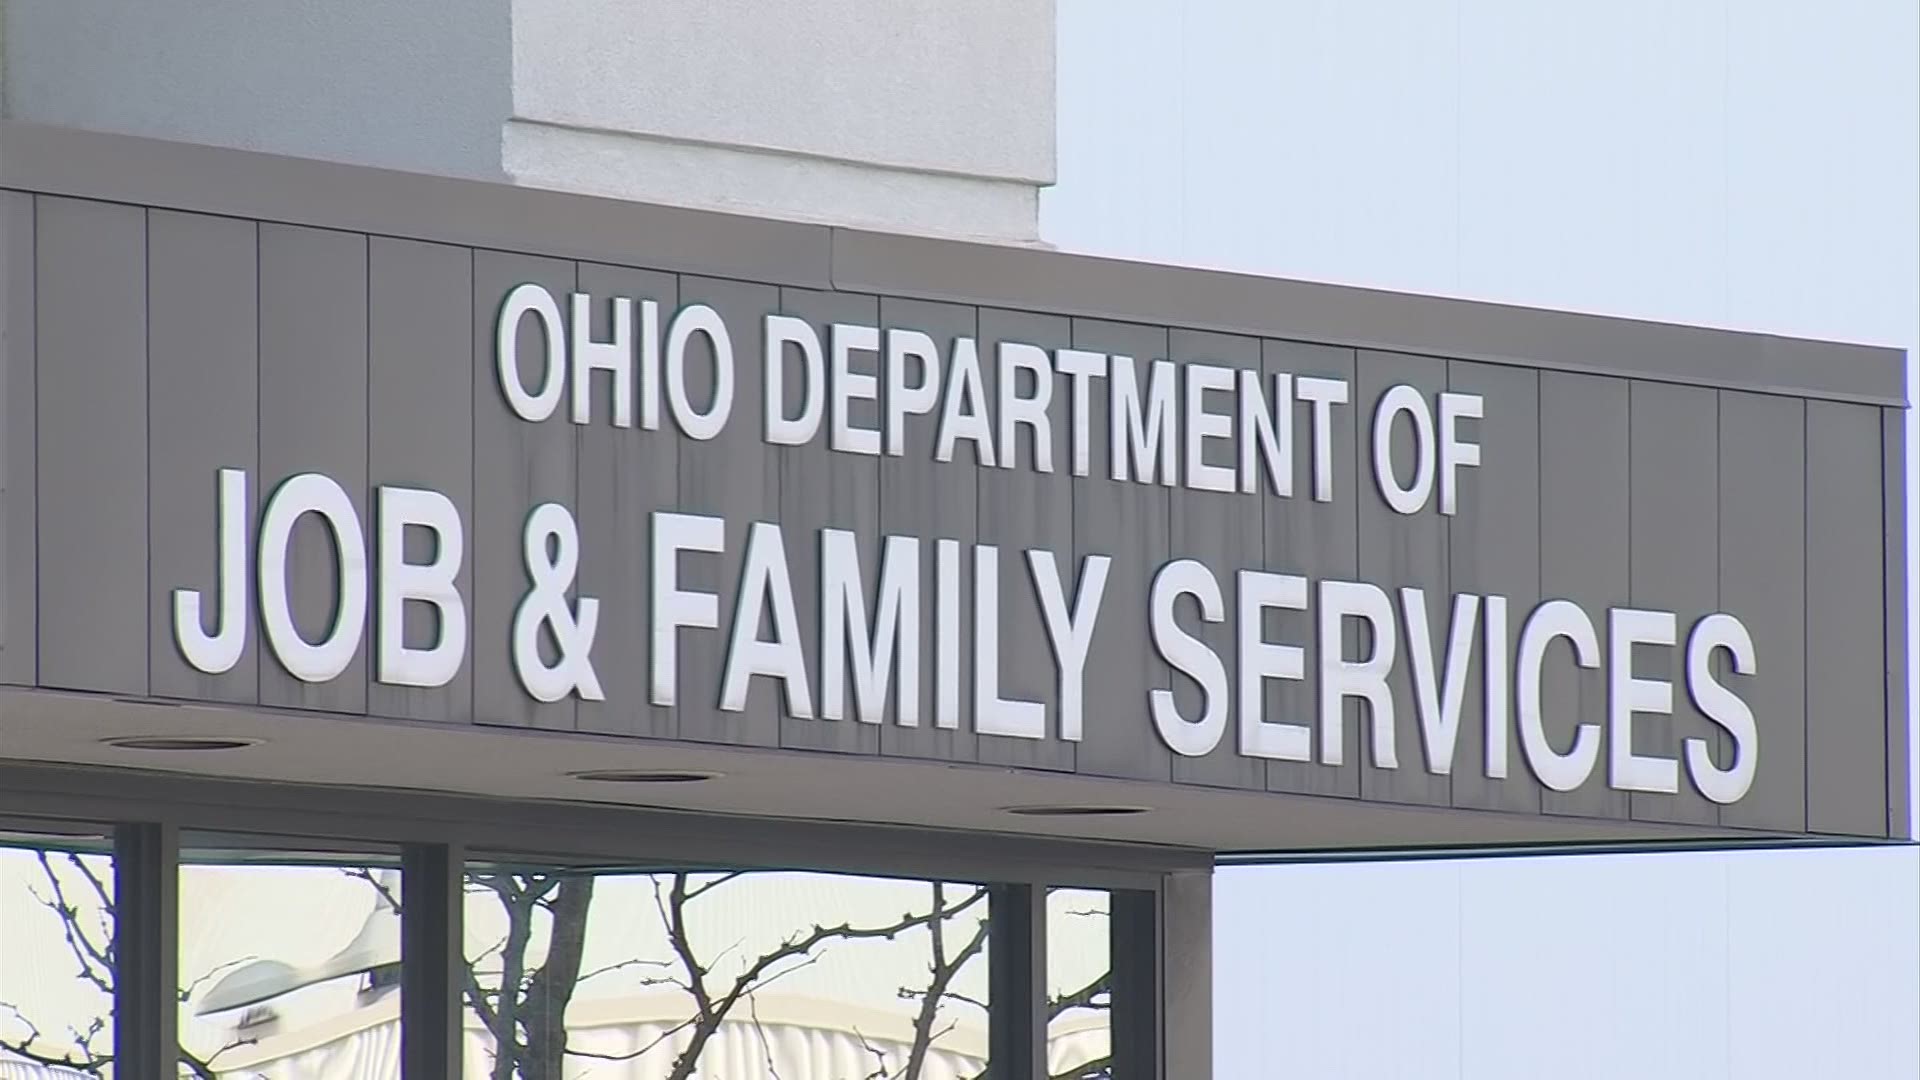 Gov. DeWine said much of the problems with the Ohio Department of Job and Family Services has to do with the state's old computer system.